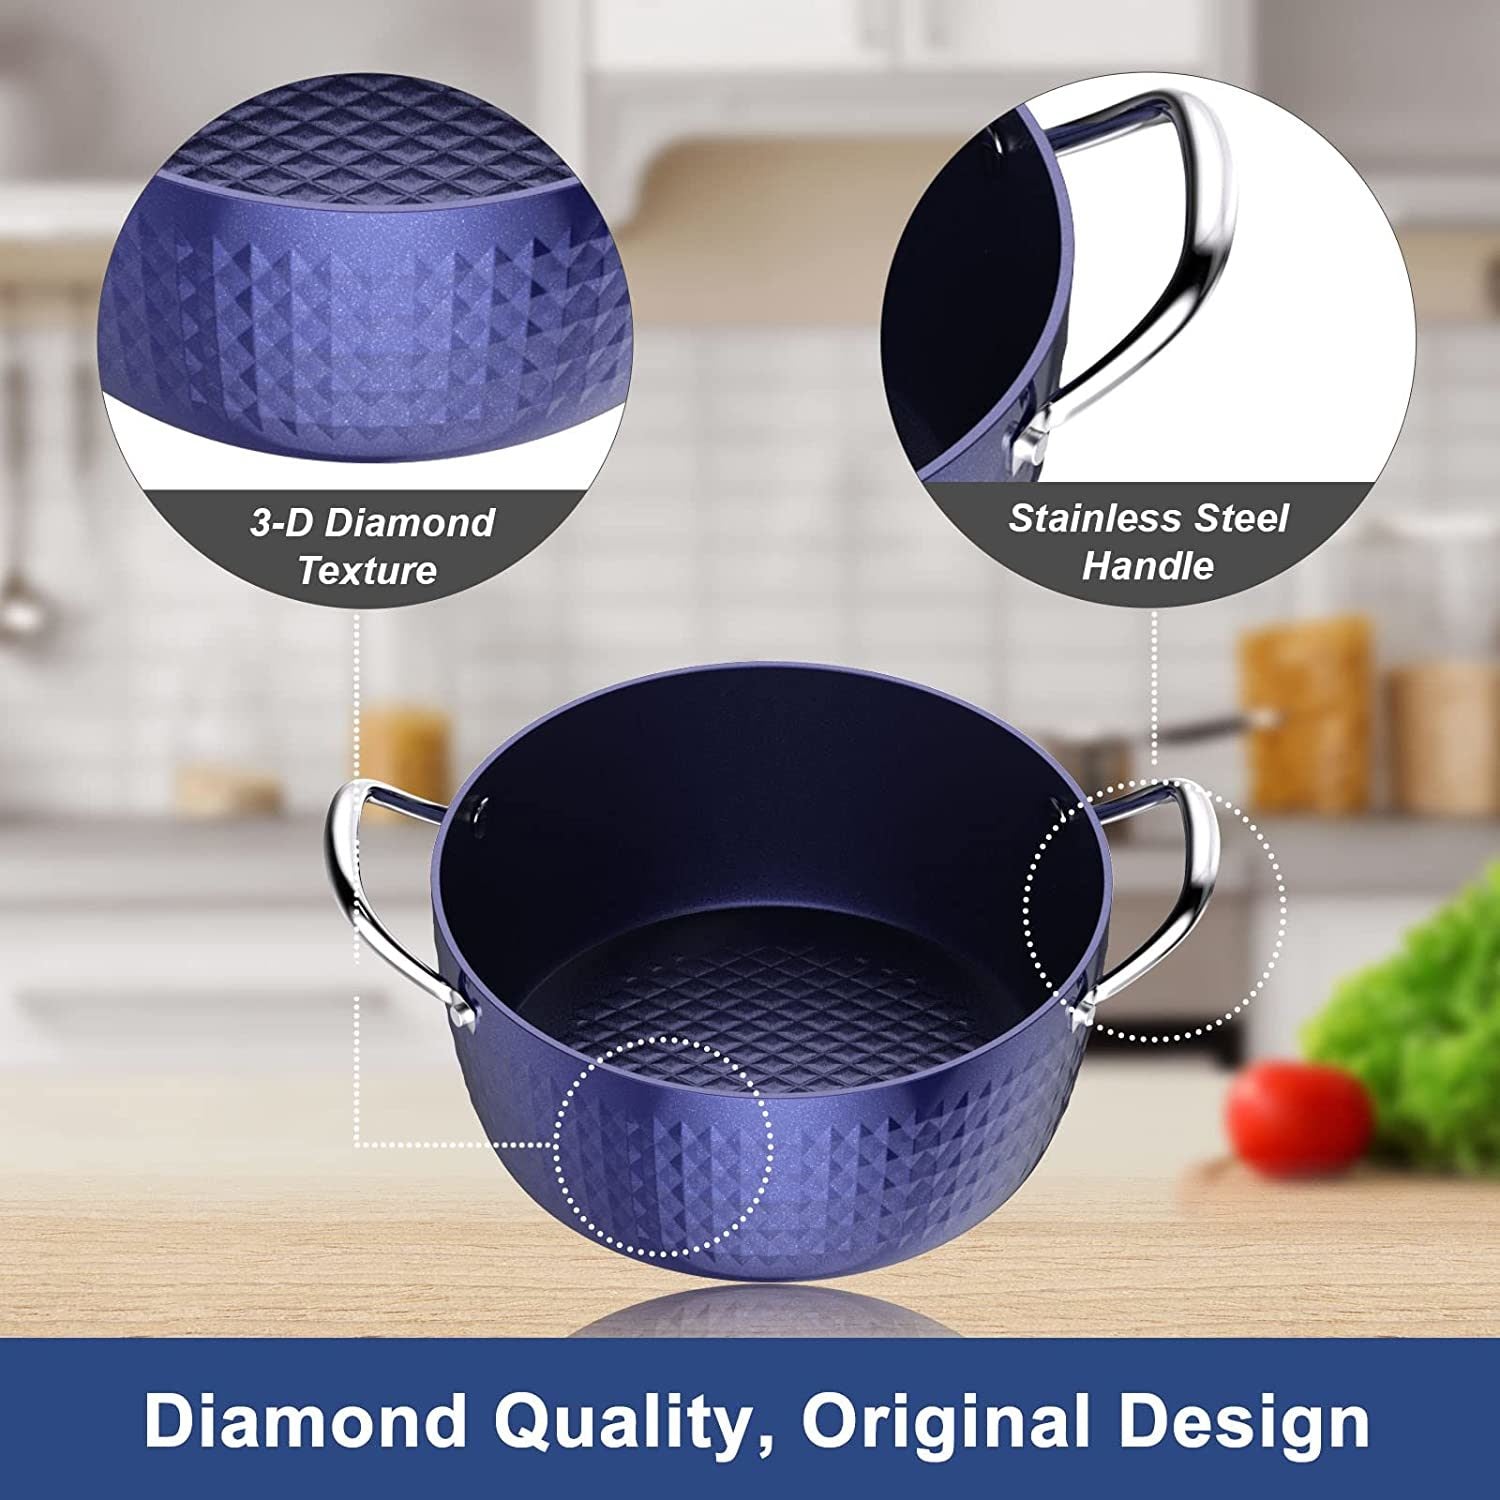 3.7 Quart Cooking Soup Pot with Lid, Small Nonstick Soup Pot with Lid, Round Small Soup Pot 3.3 L, Blue Nonstick Induction Stock Pot, 100% Bpa Free Anodized Healthy Ceramic